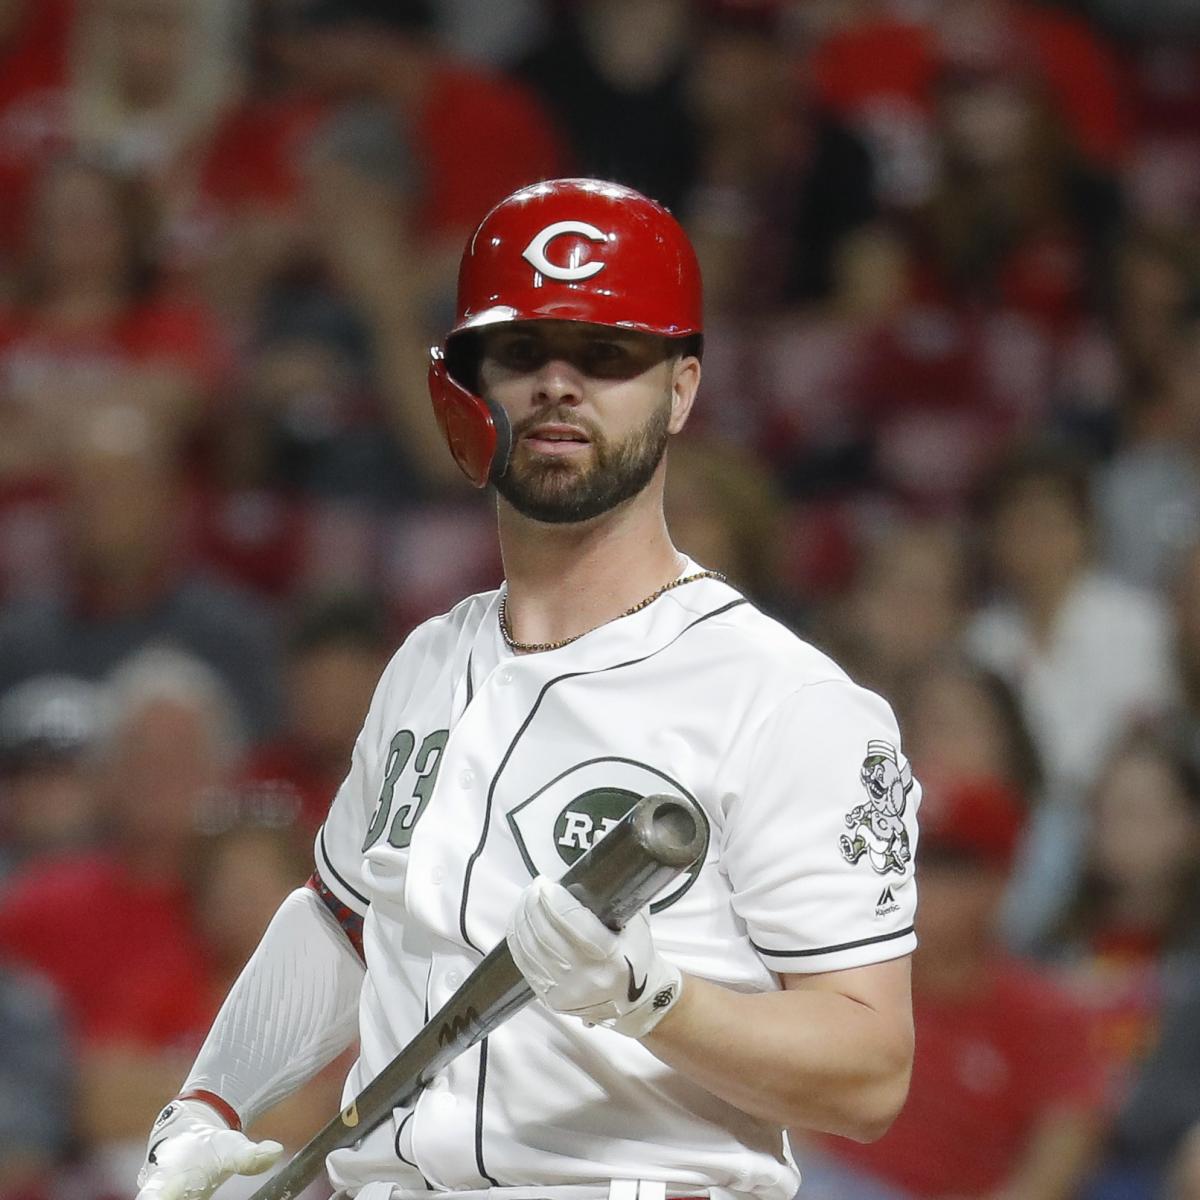 Video: Watch Reds' Jesse Winker Find Out About Yasiel Puig Trade from